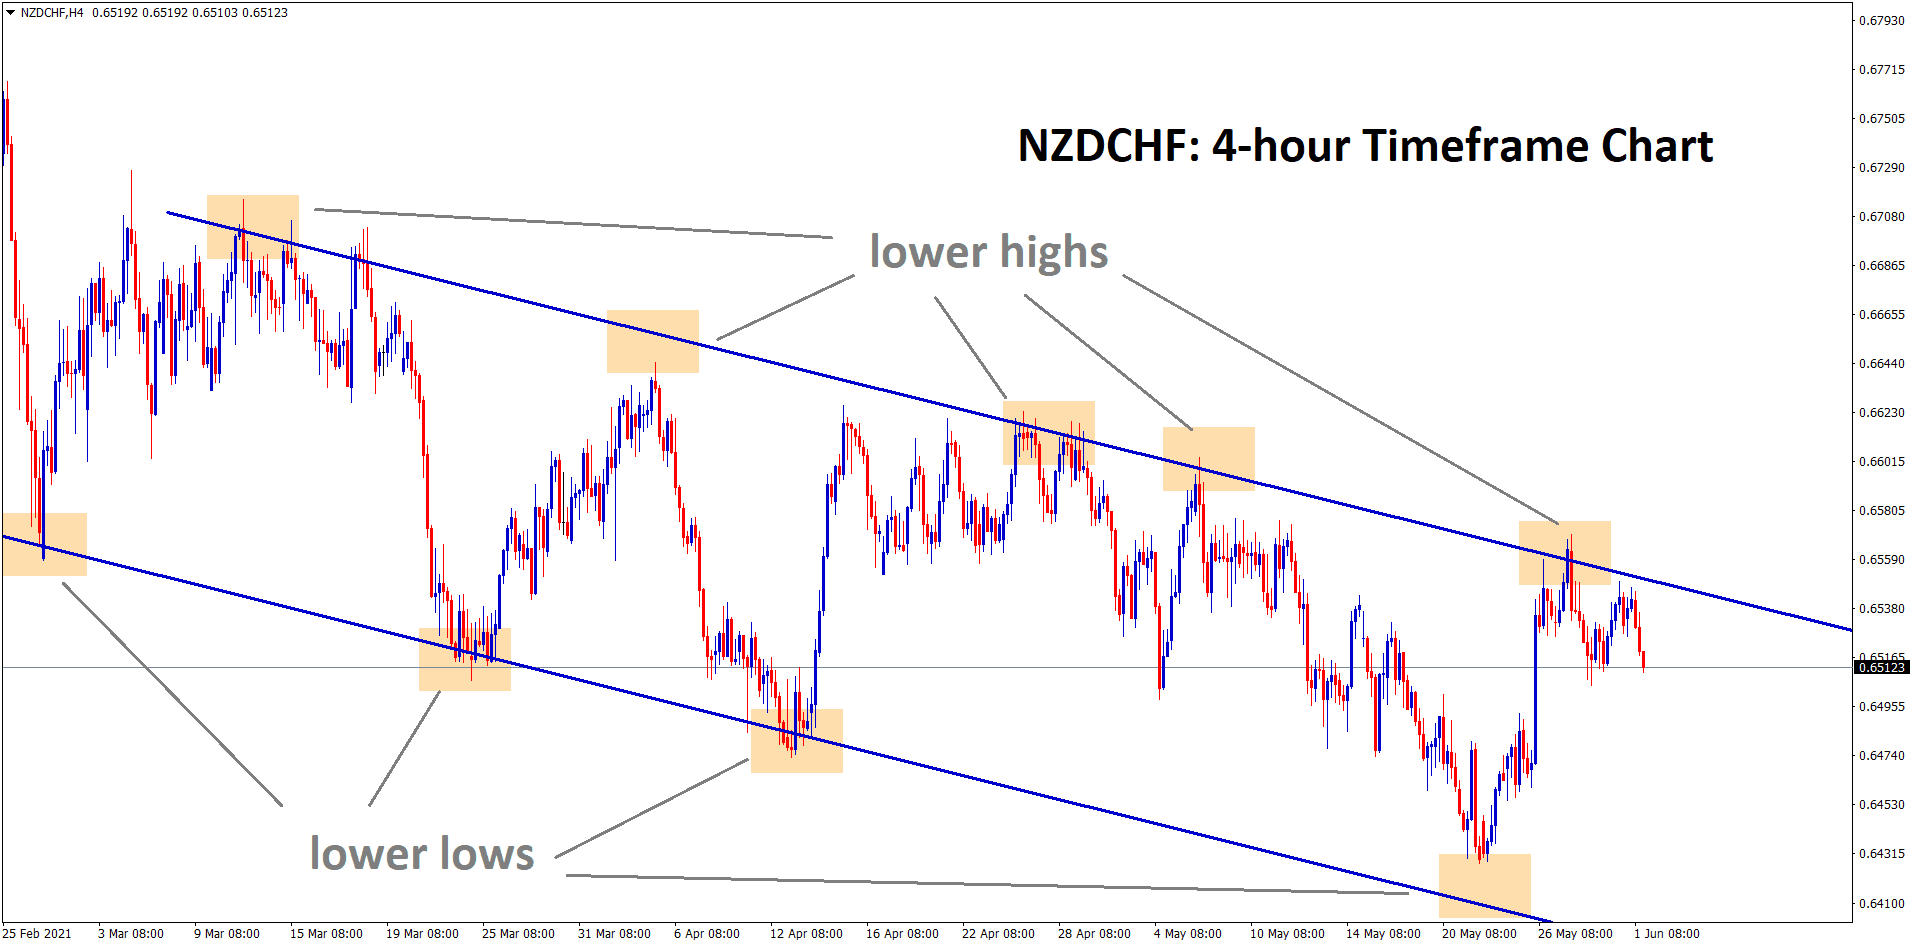 nzdchf falling from the lower high level of a descending channel